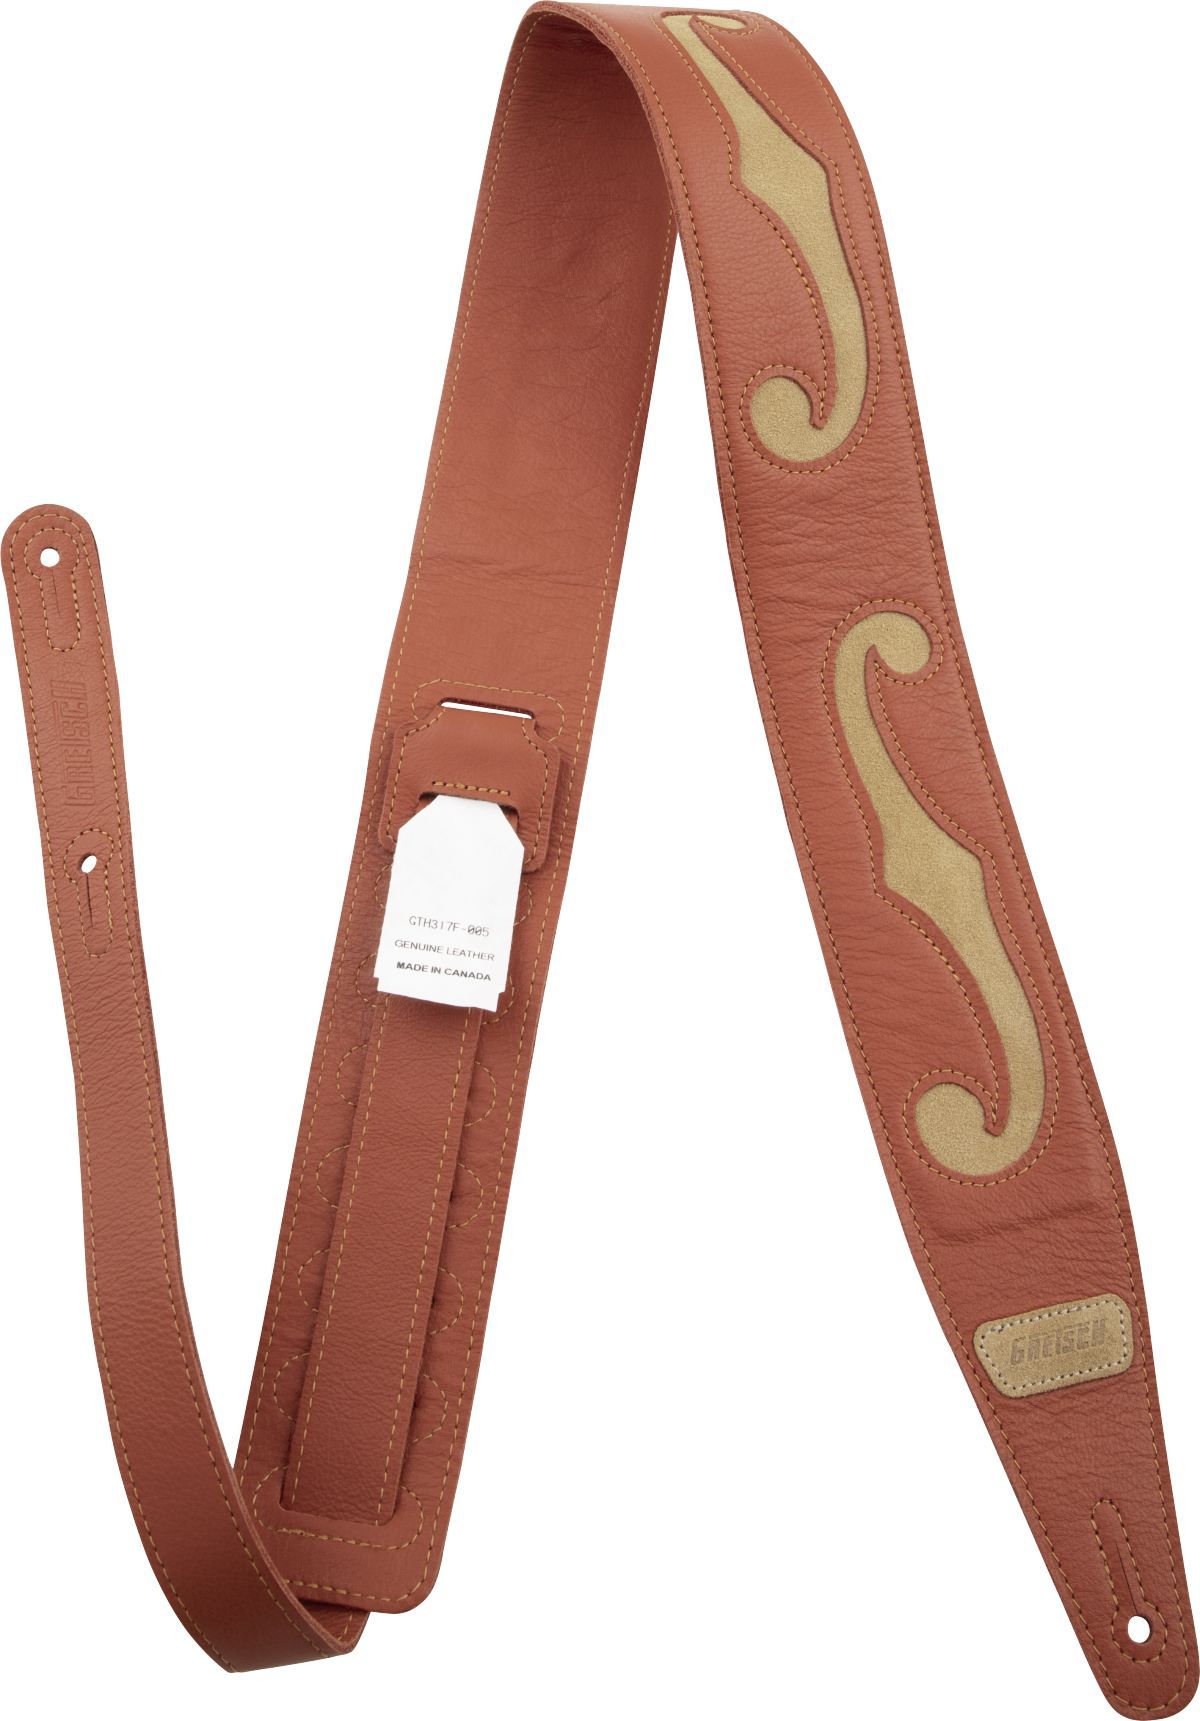 Gretsch F-Holes Leather Straps Orange and Tan Orange with Tan Accents